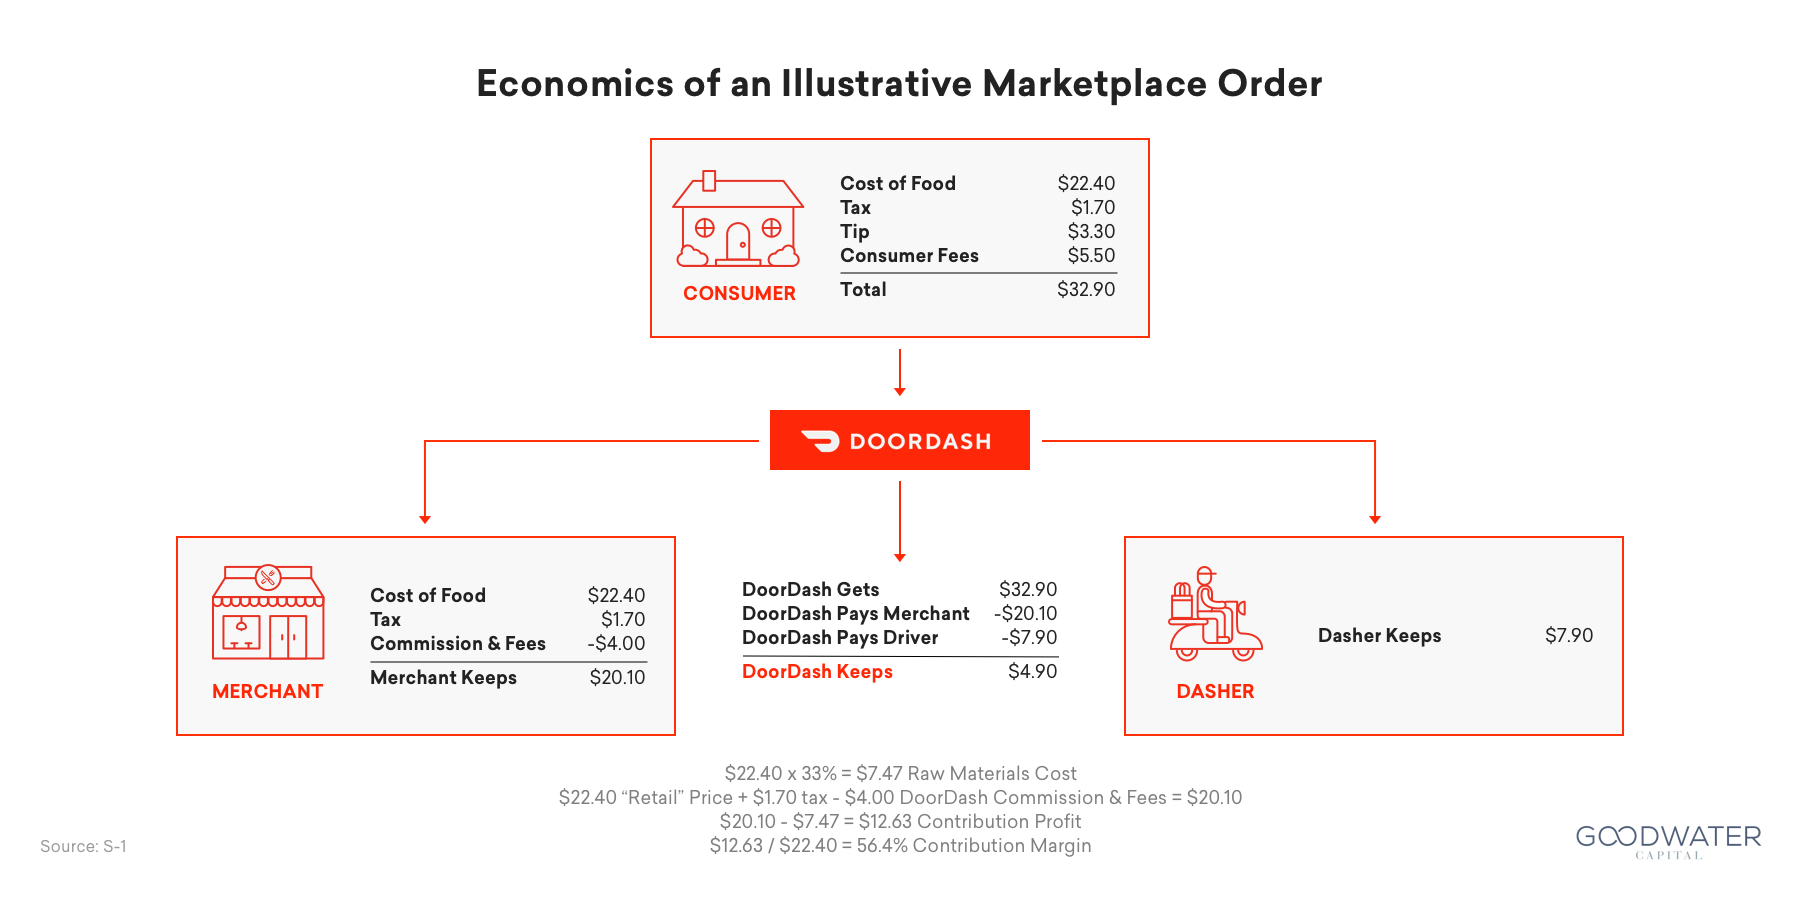 DoorDash orders surge 24% in the third quarter, helping to narrow